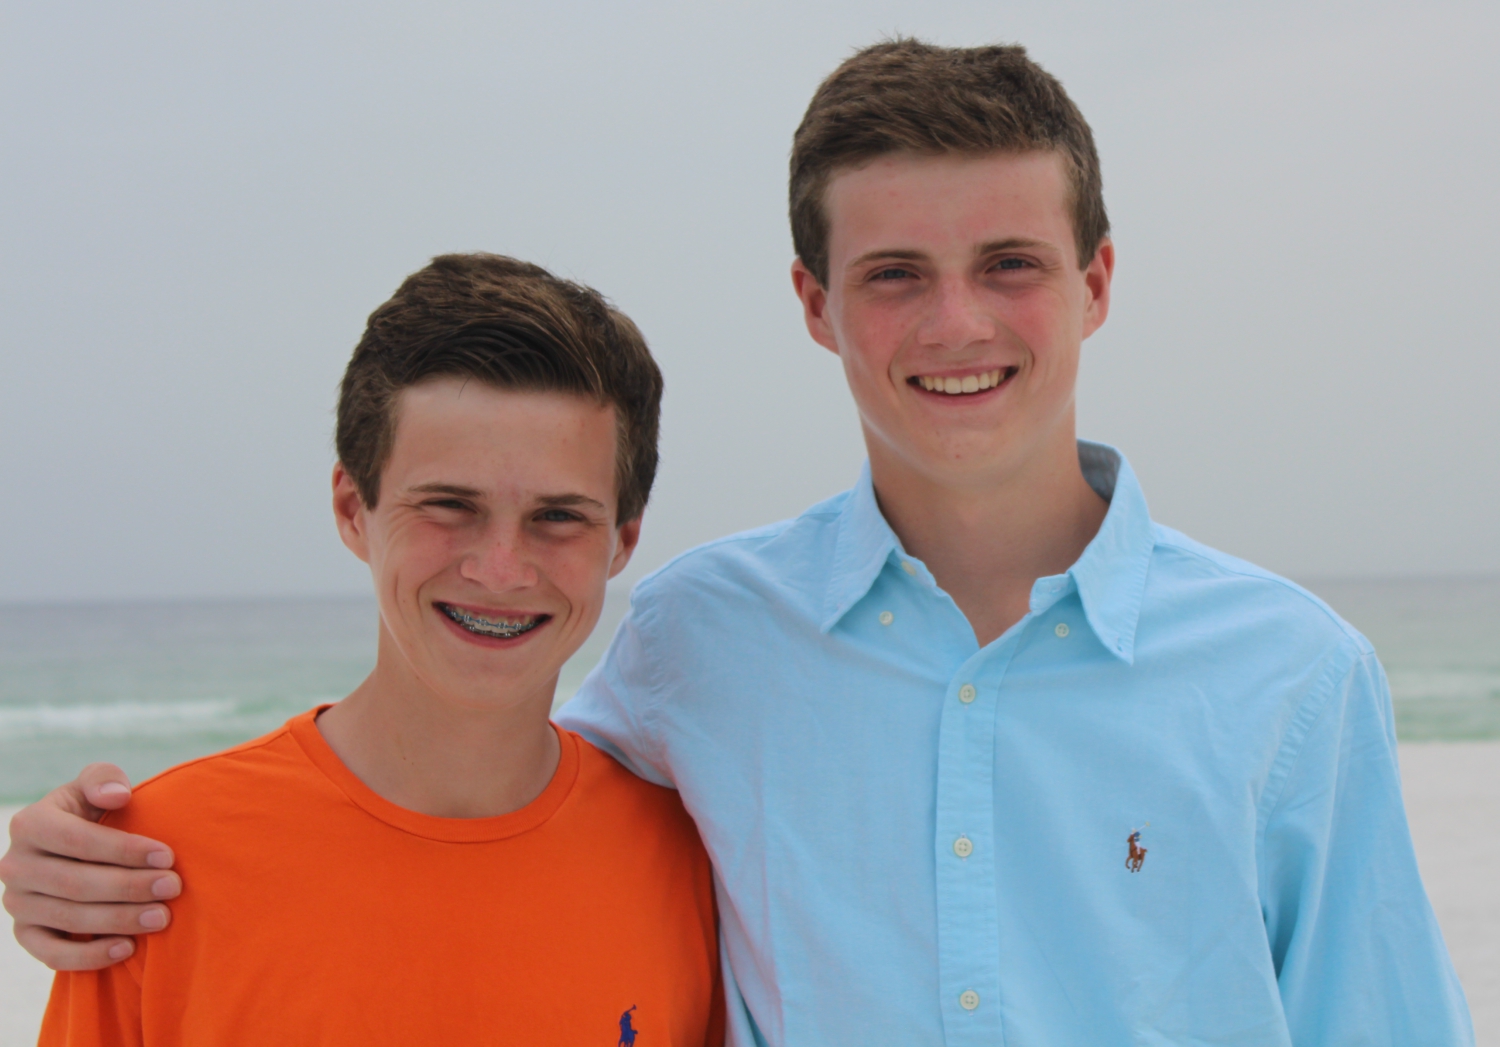 George and his brother Jack at a beach with the ocean in the background